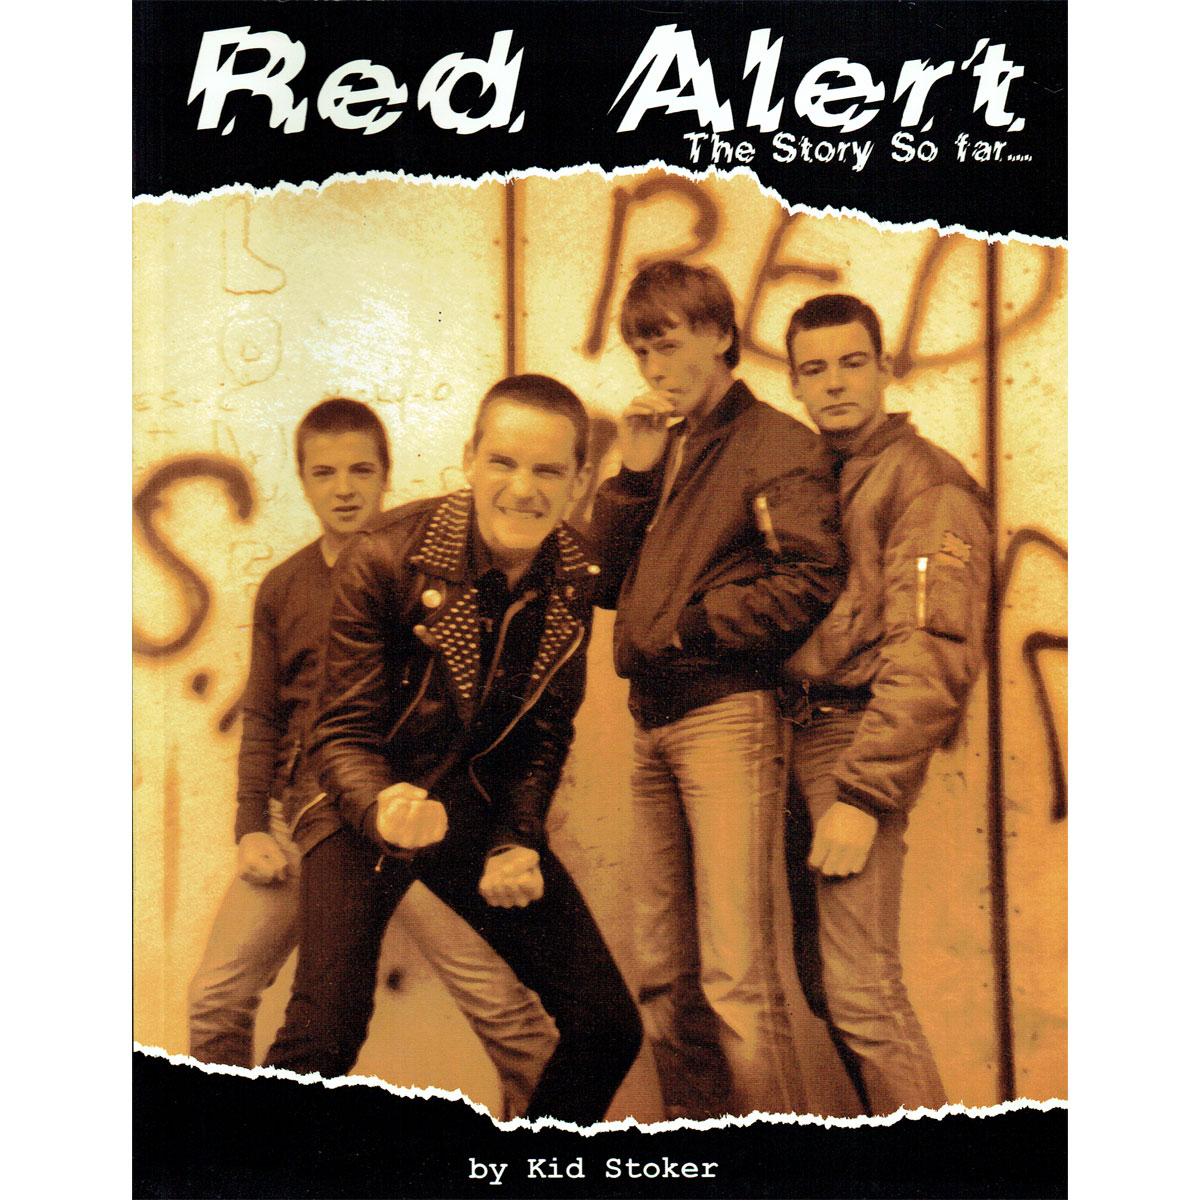 RED ALERT The Story so far...by Kid Stoker BOOK cover artwork 1